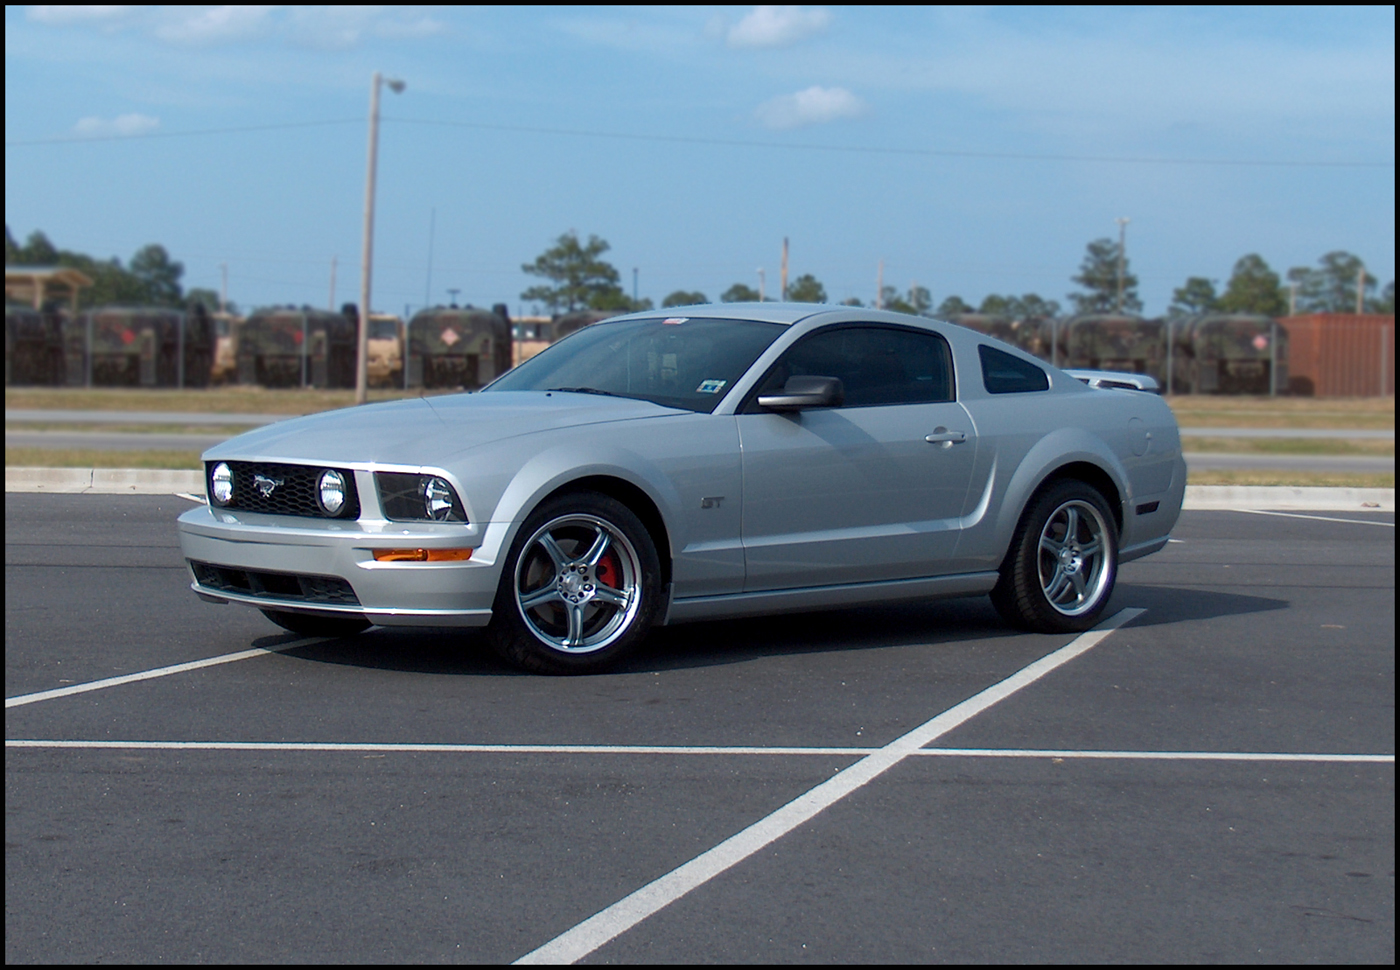 2005 Ford mustang gt dimensions #5